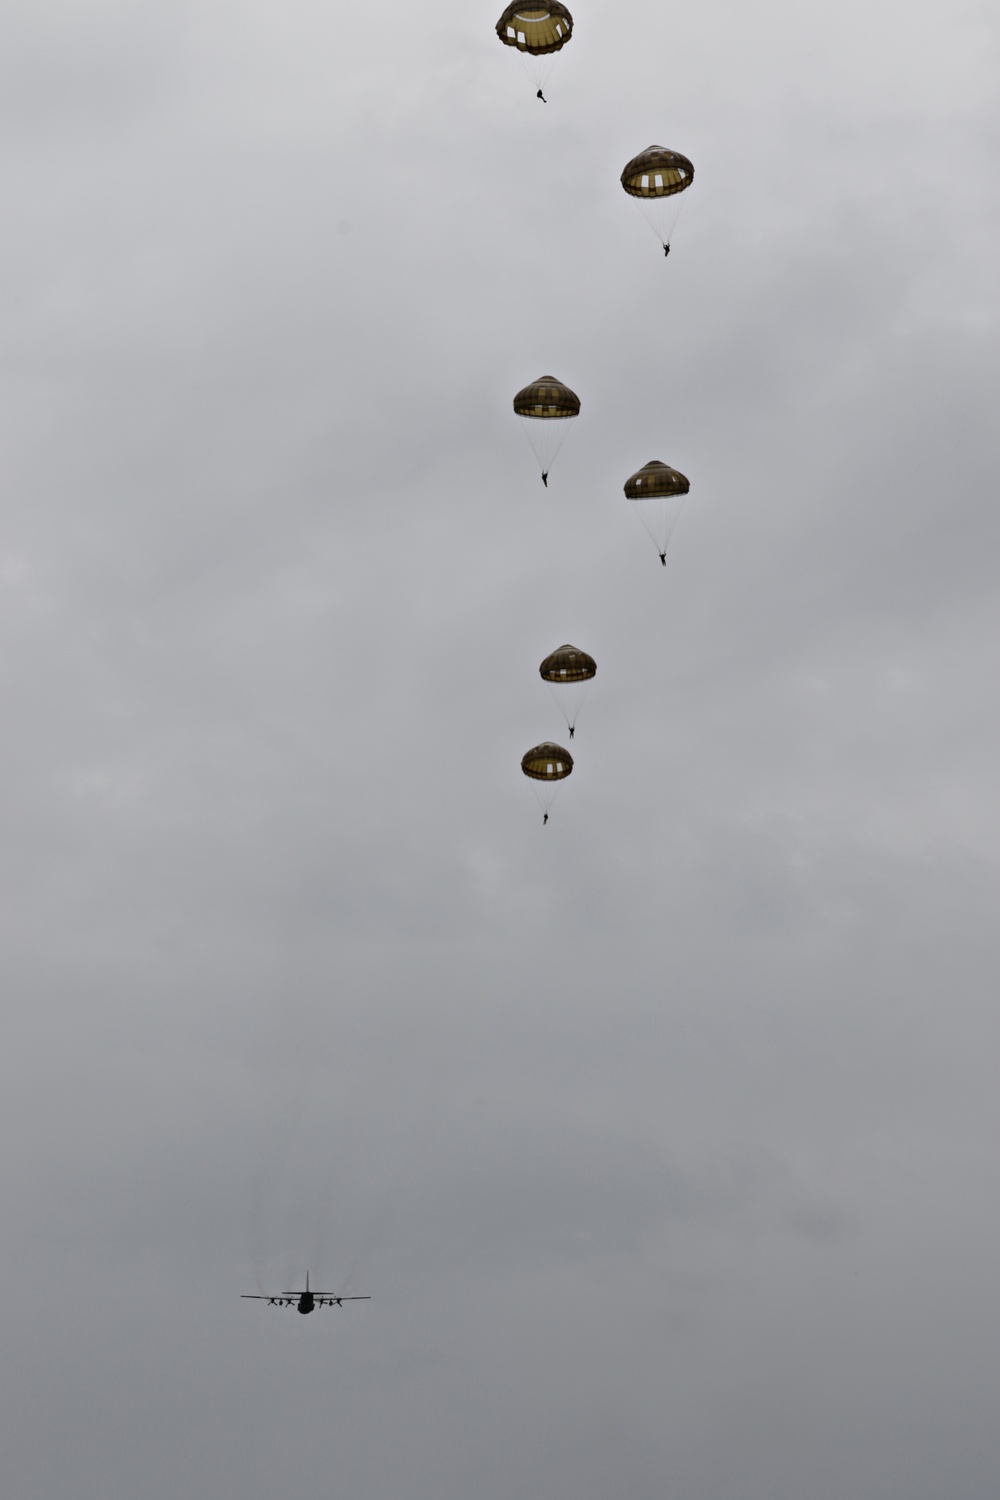 D-Day 75 Commemoration Jump